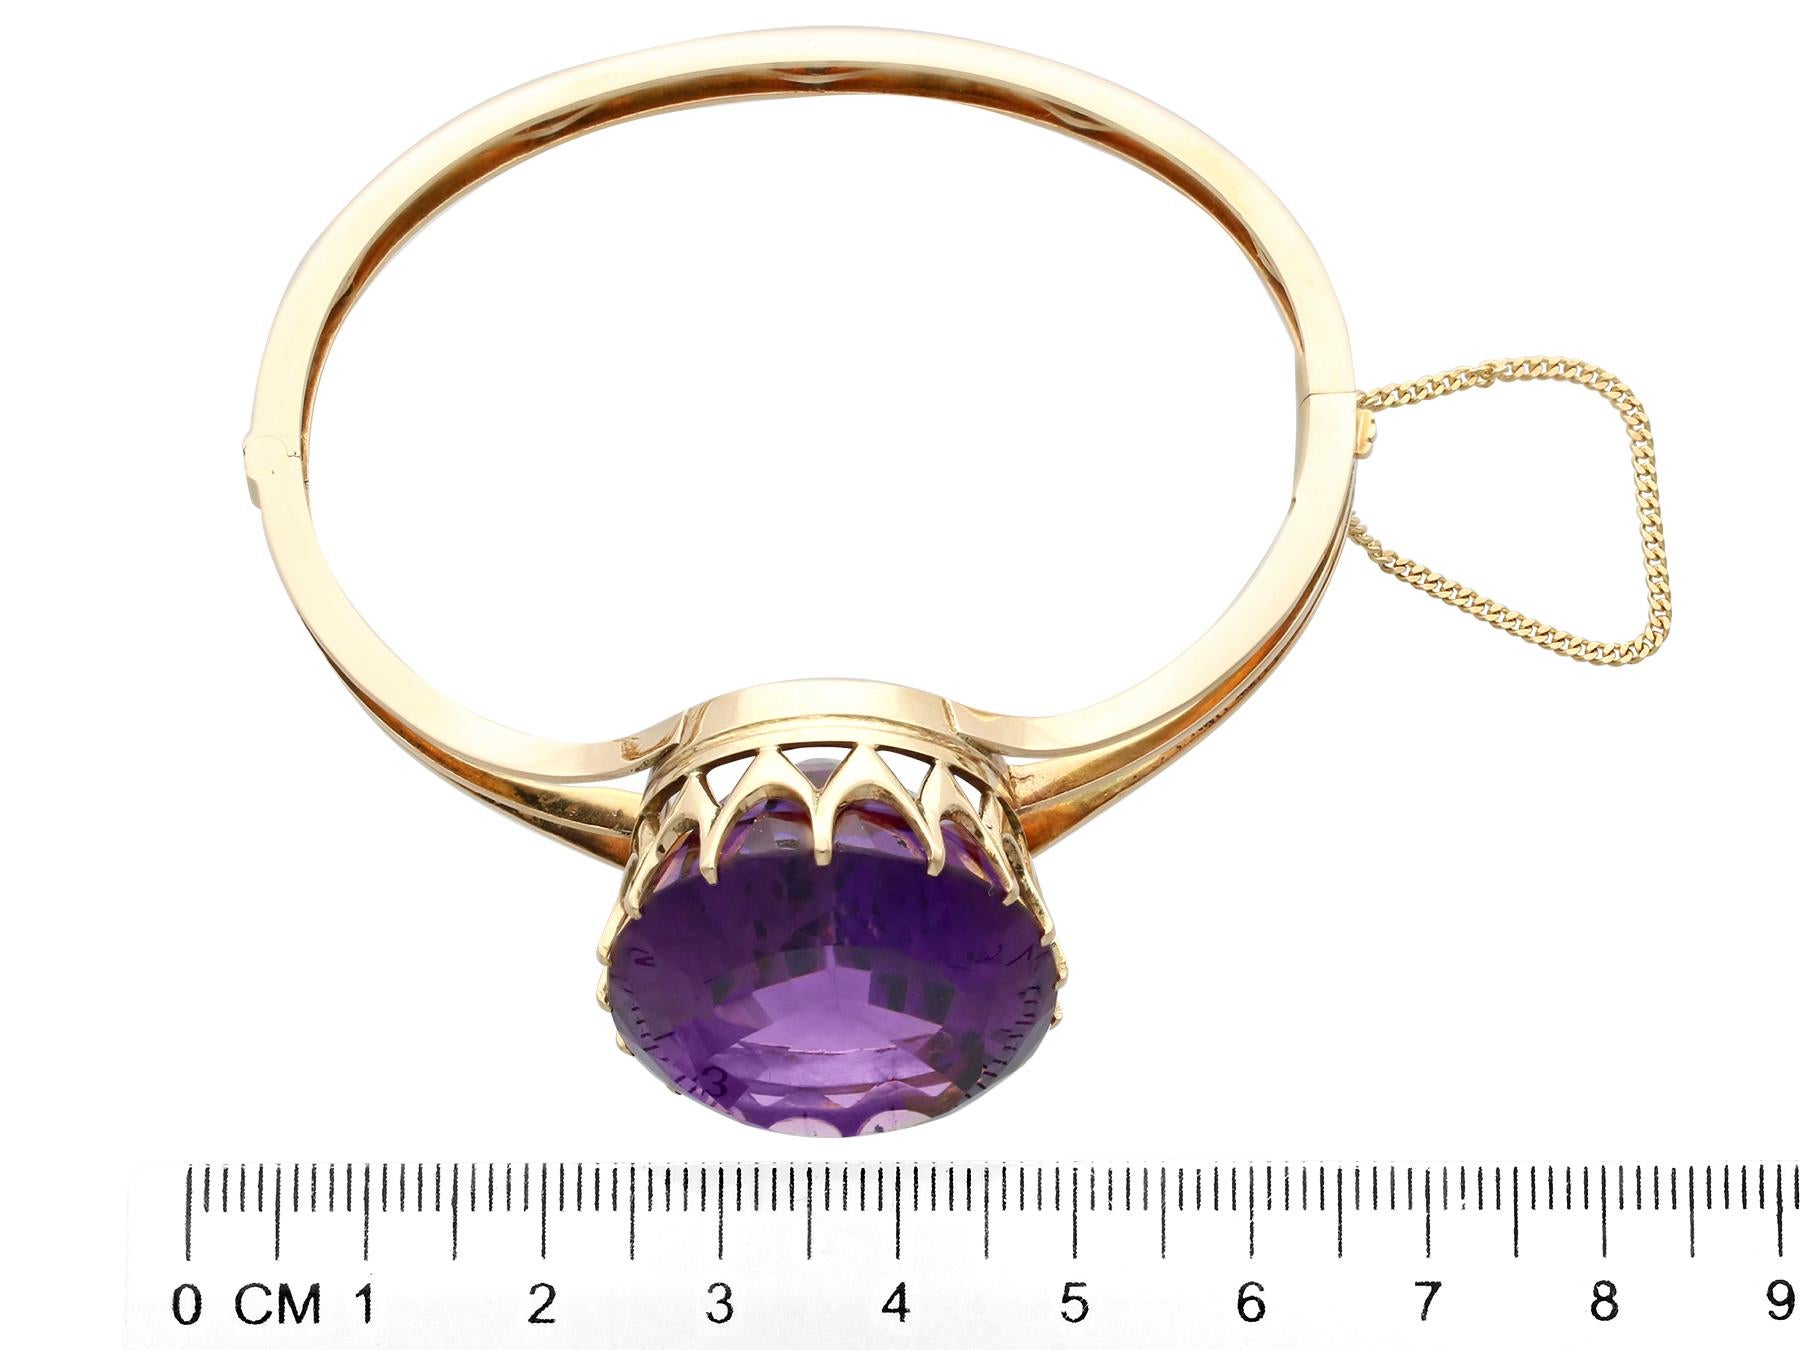 Antique 70.65ct Amethyst and 14k Yellow Gold Bangle For Sale 2